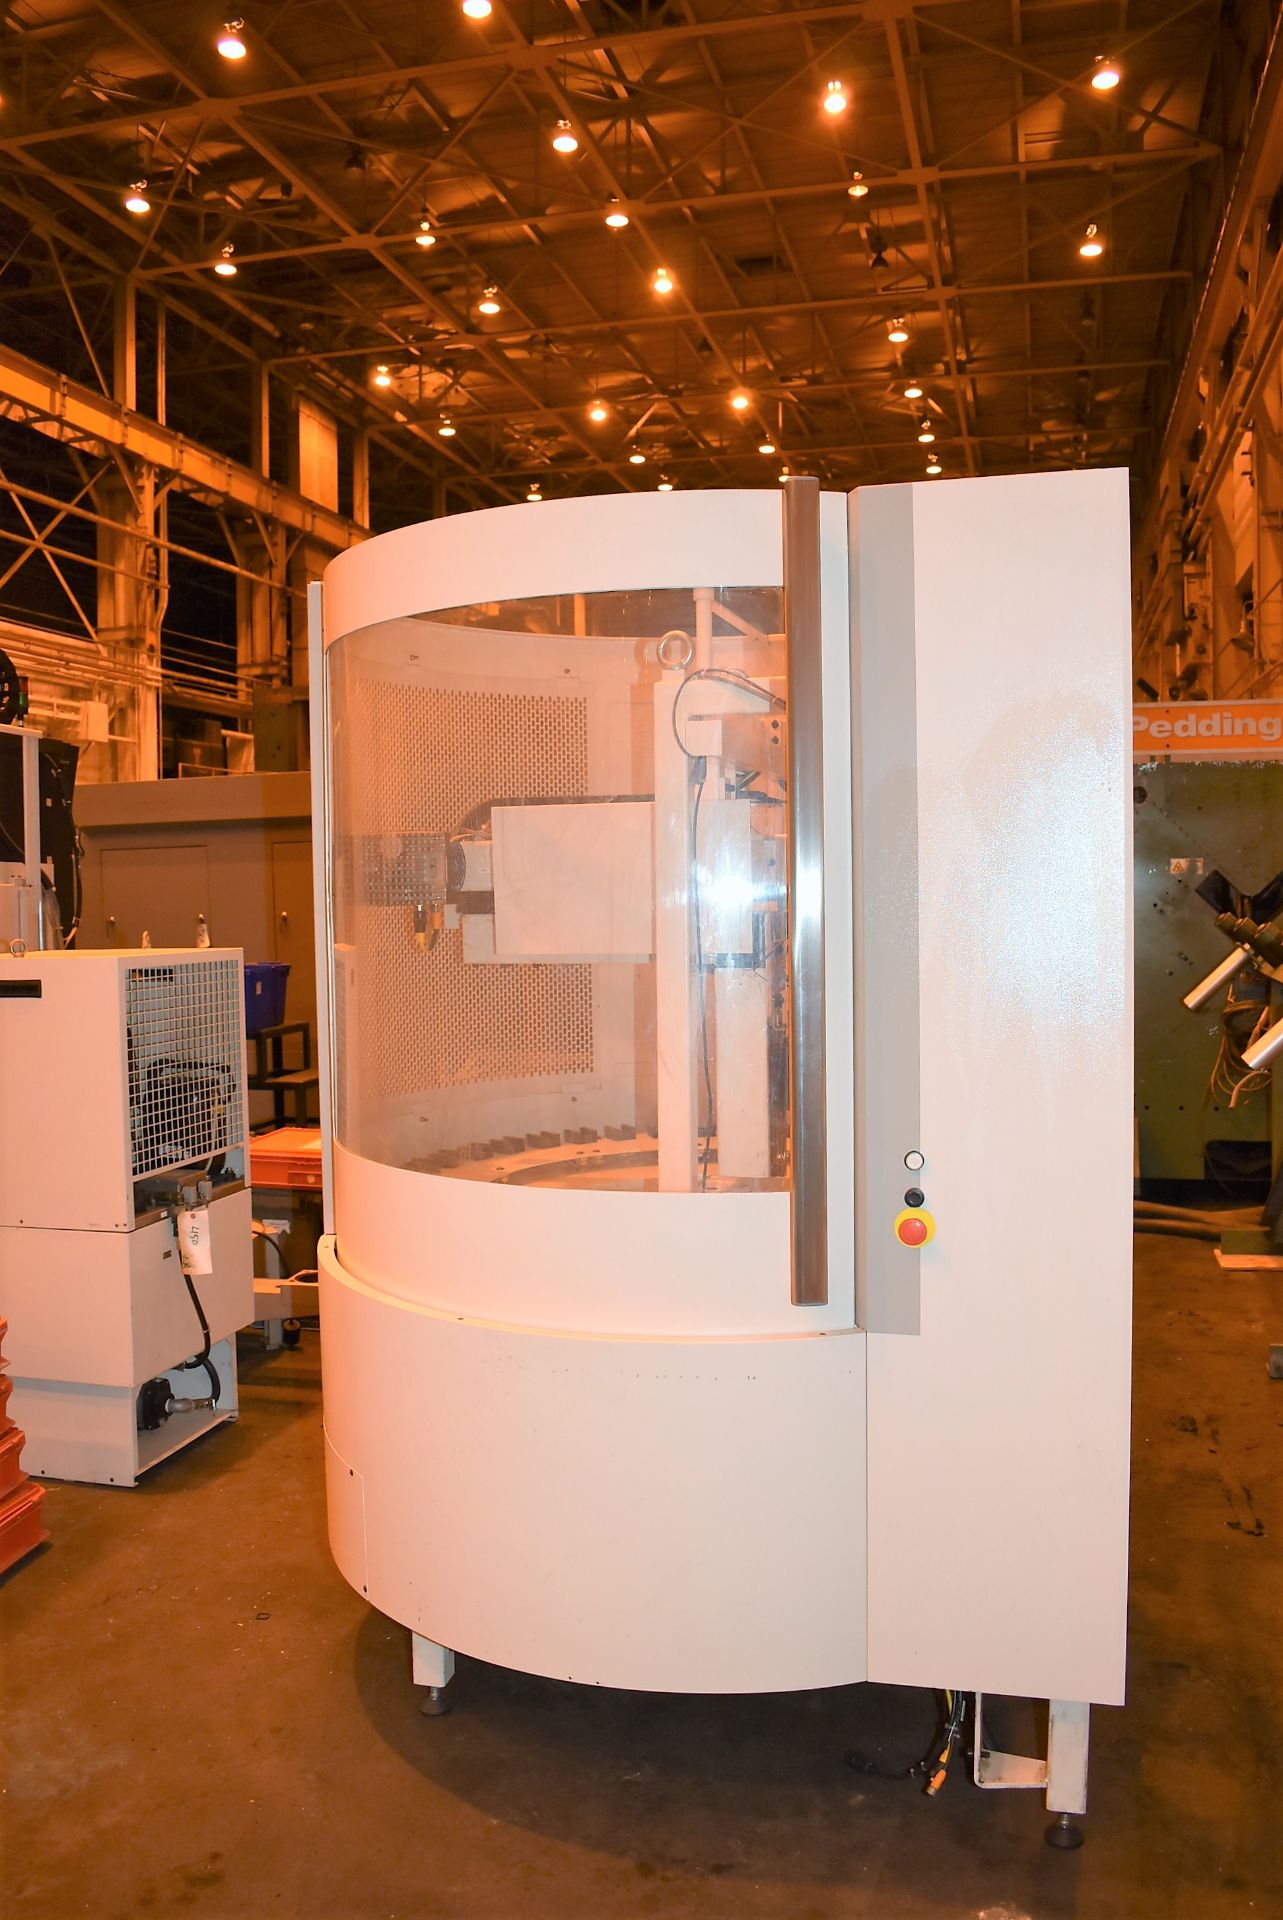 MIKRON 45-APC 40-Station Automatic Pallet Changer(Can Be Used For MIKRON HSM-400U Machining Centers)